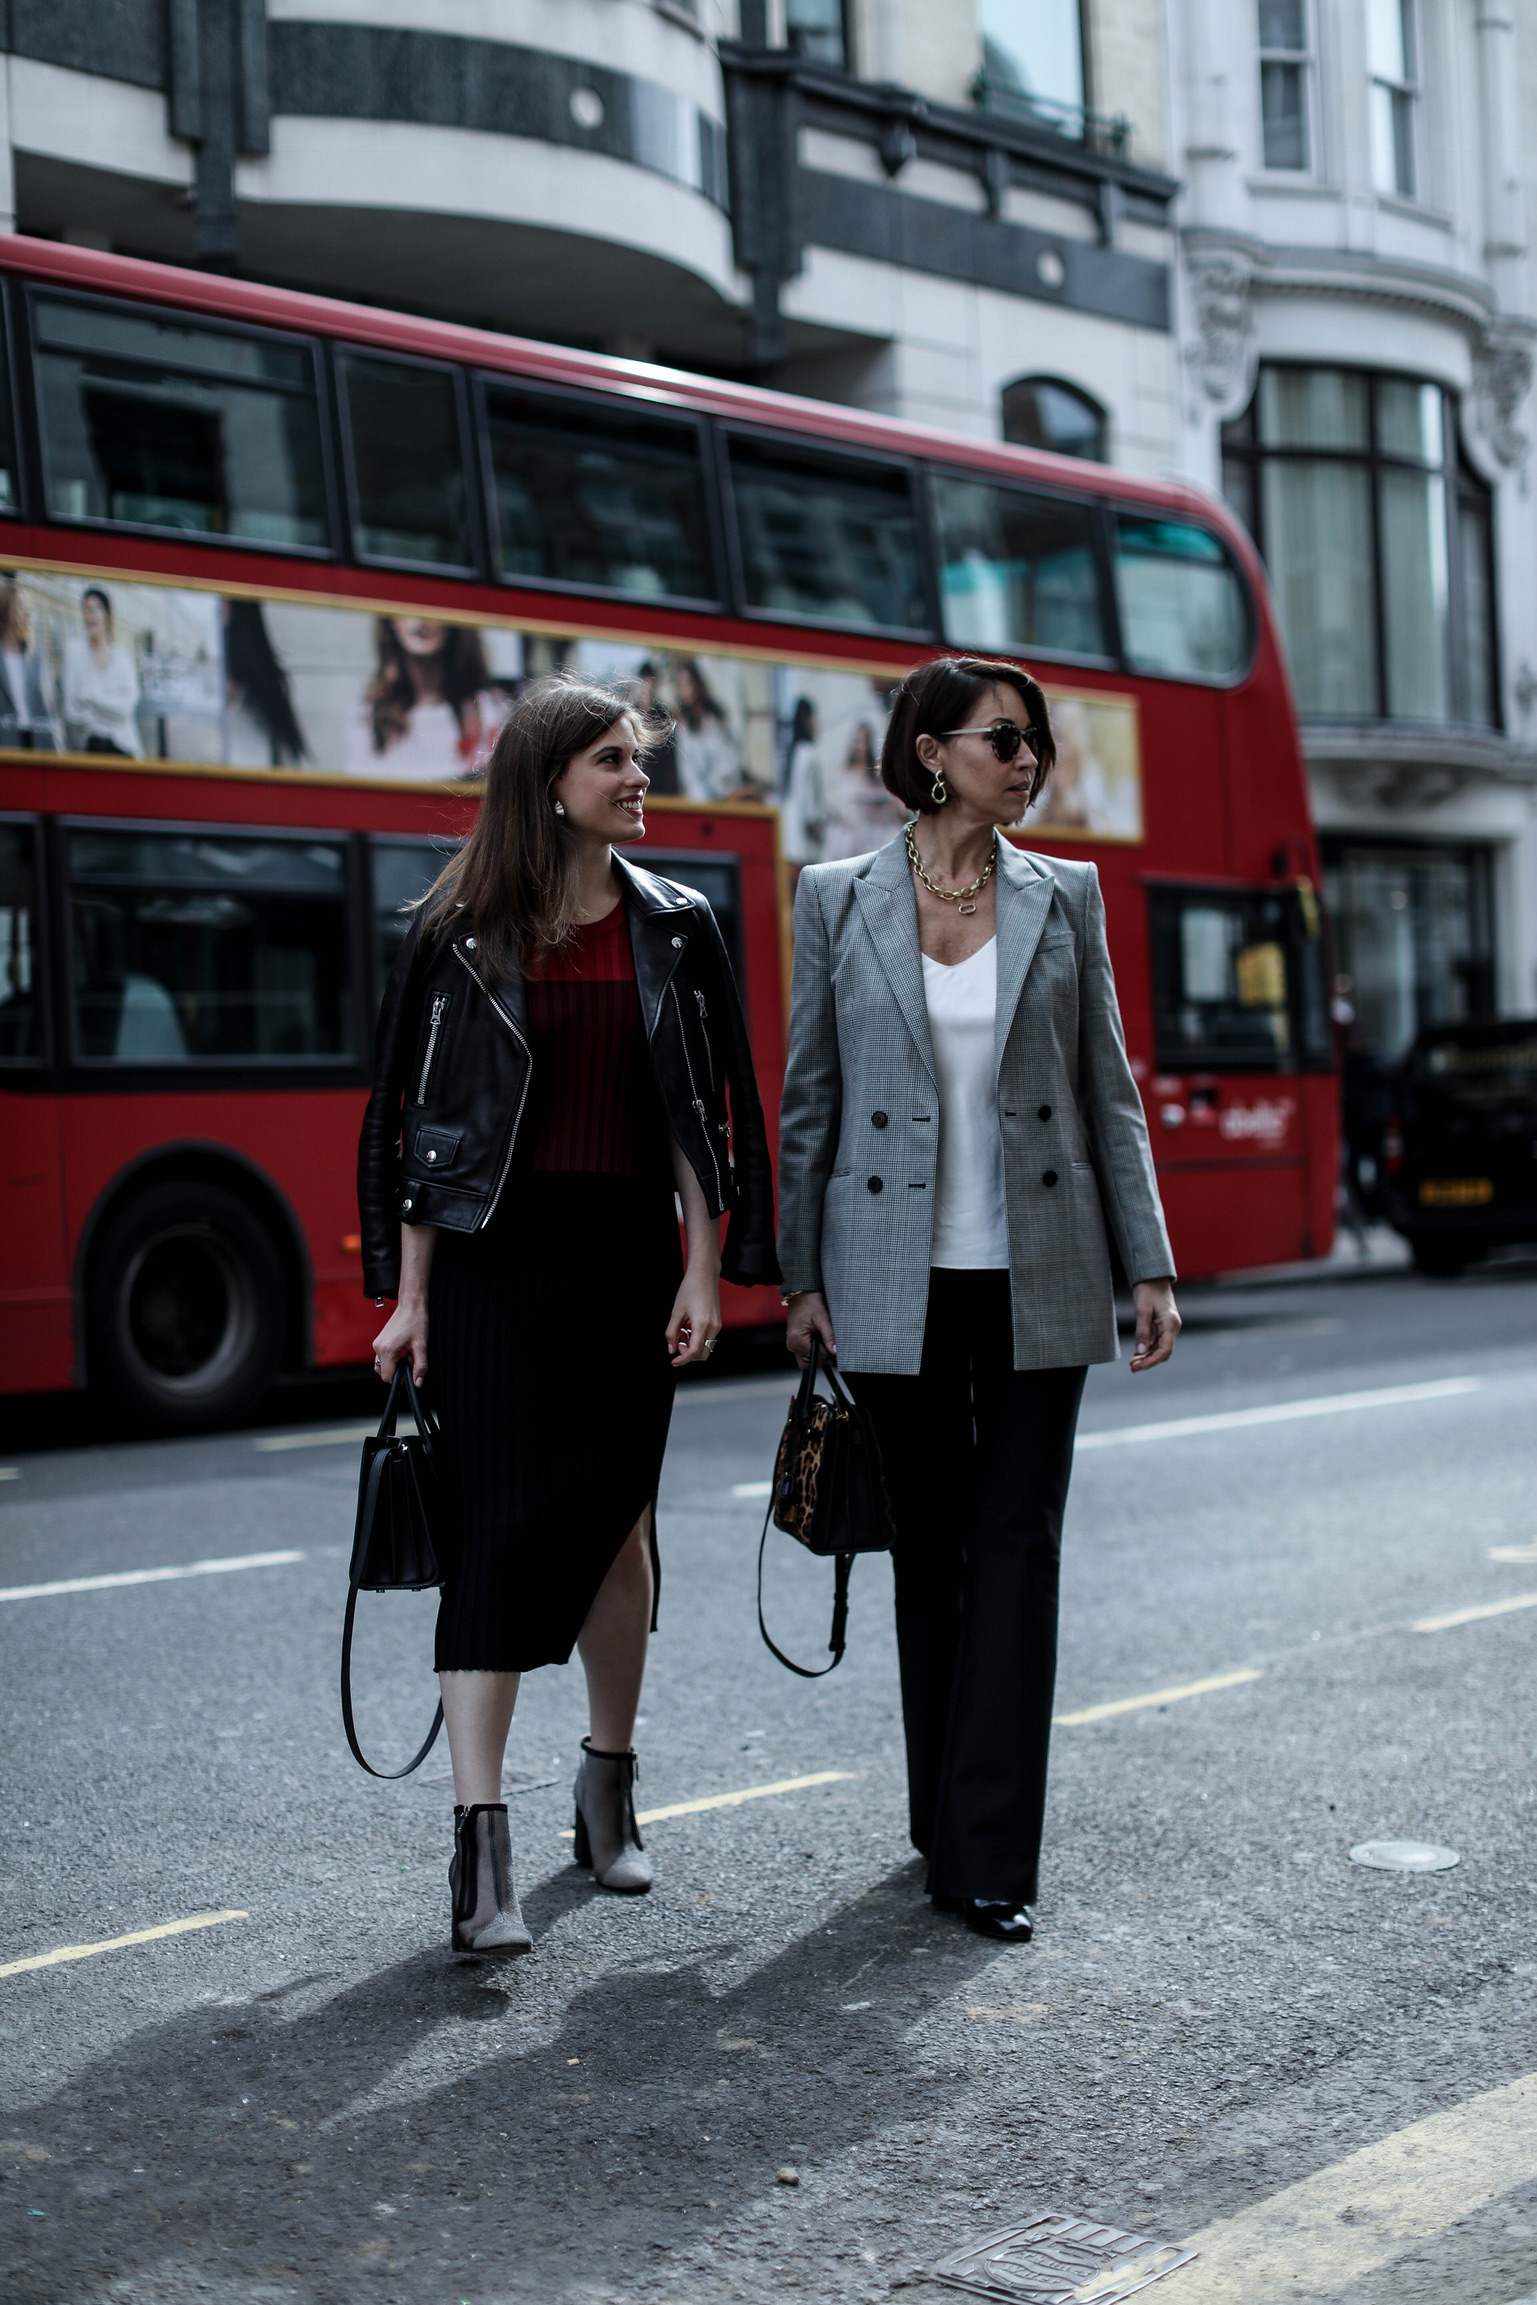 Two women walking in front of a red double decker bus in London: one wearing a black leather jacket, red & black stripe dress and booties, the other wears a plaid blazer with a white cami and black pants. They both have brown hair, are wearing sunglasses and carrying square bags